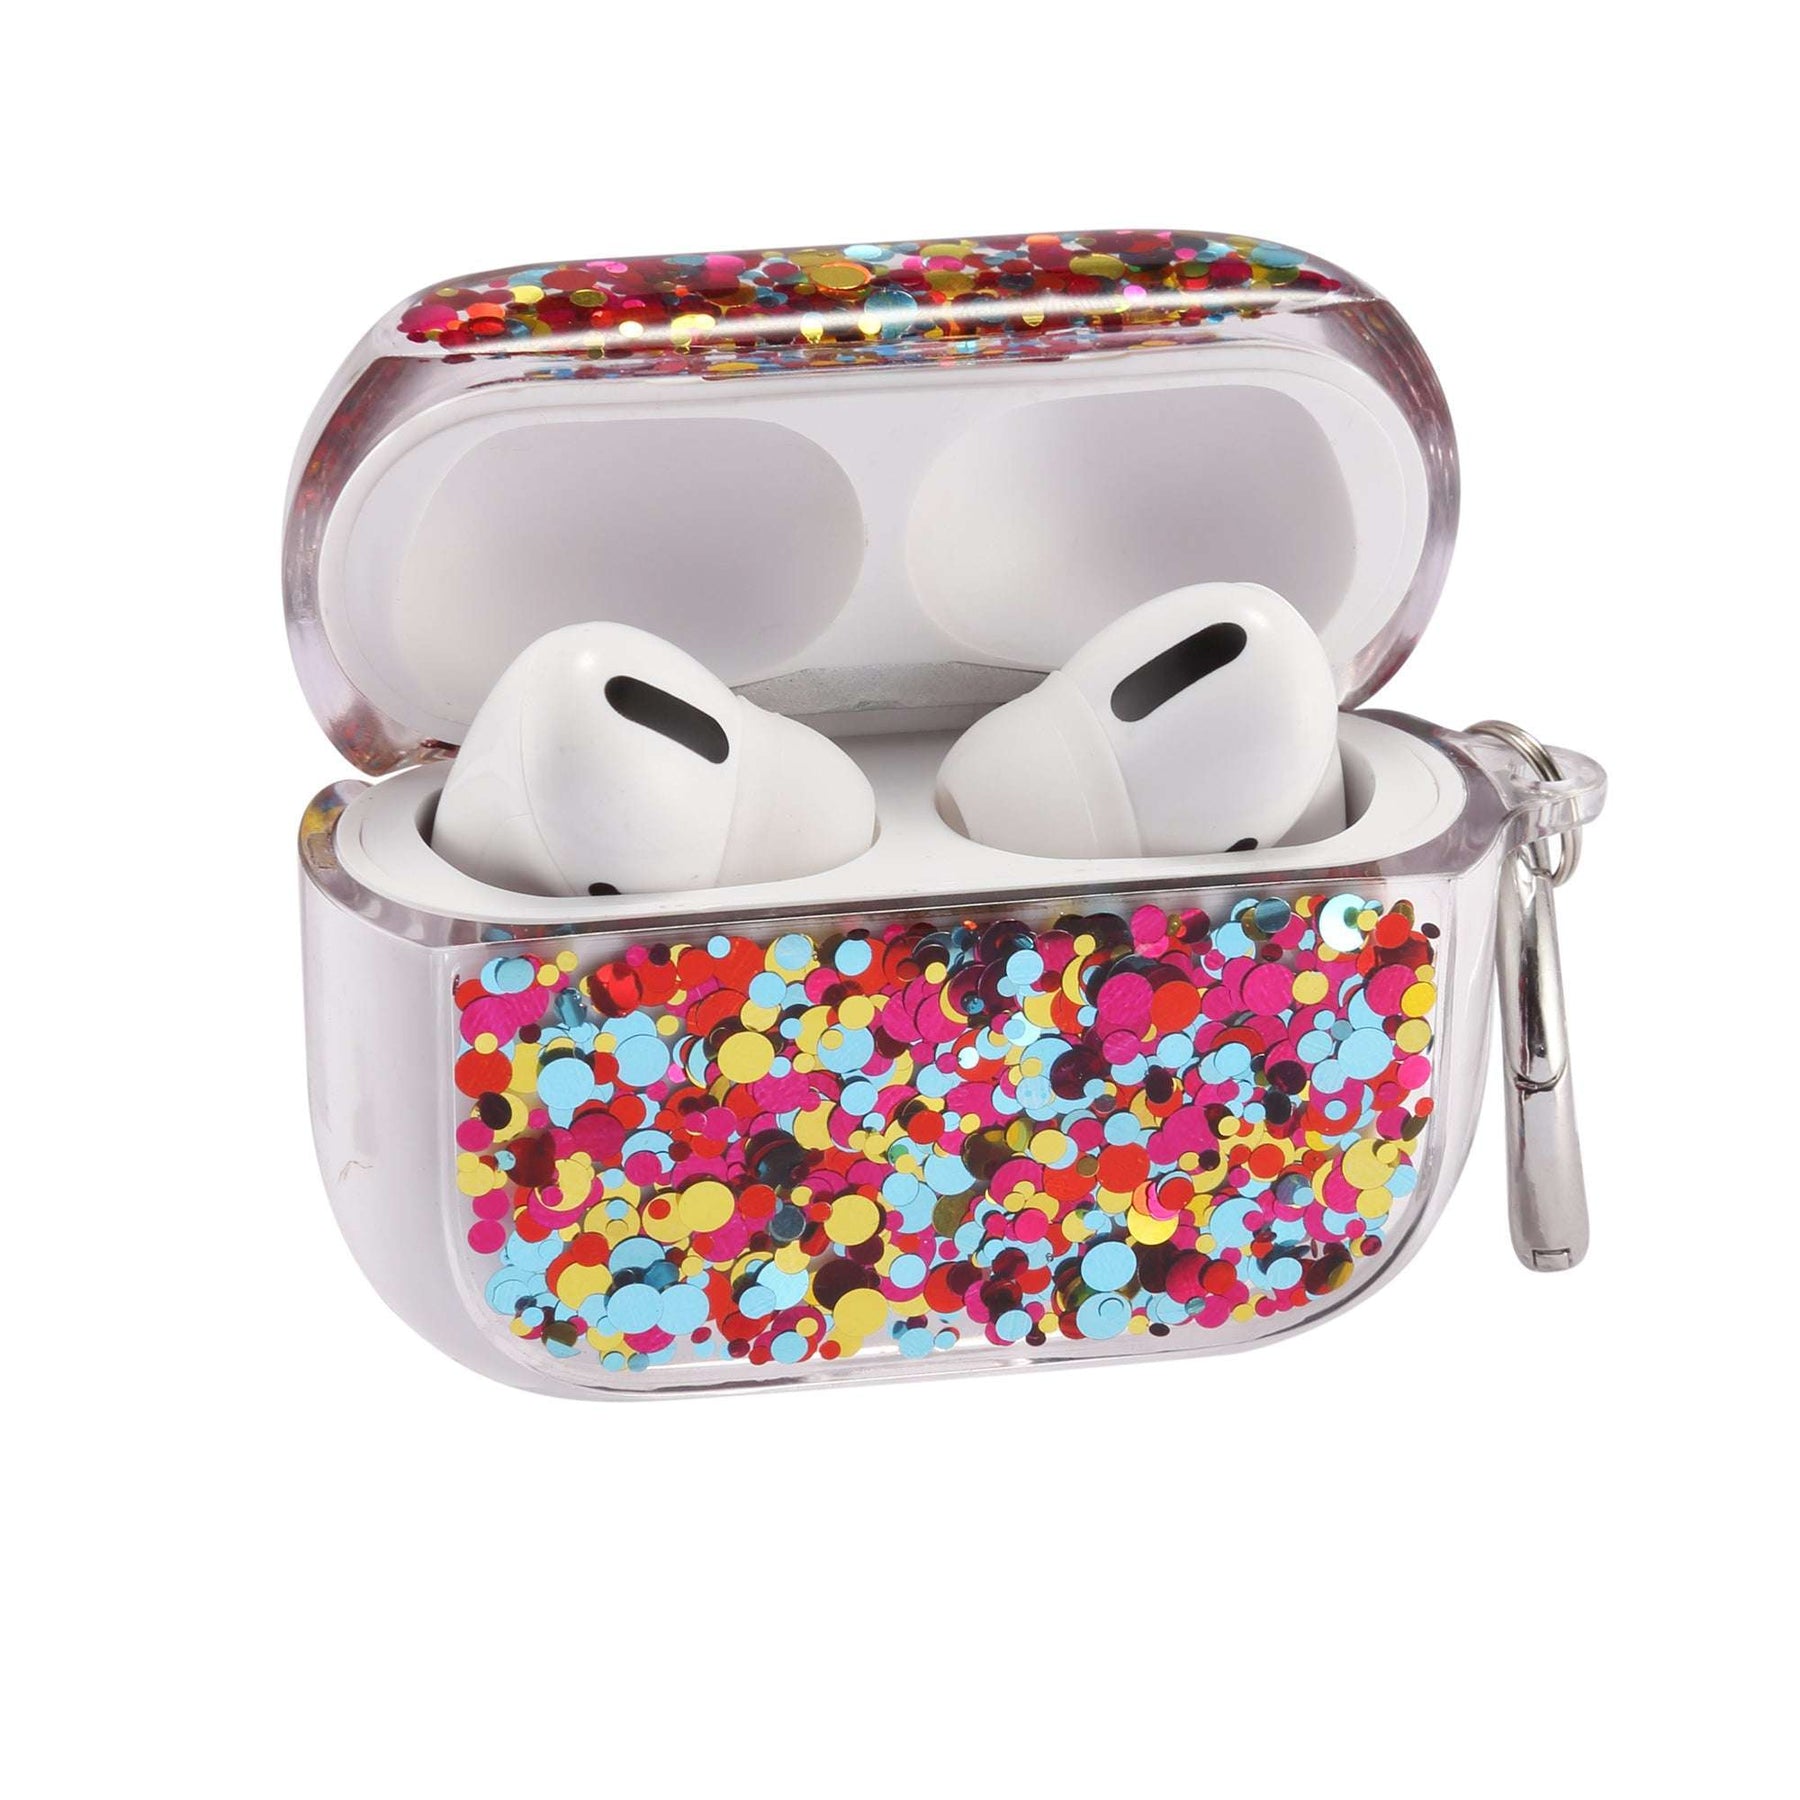 Protective Glitter Cases for Apple Airpods Pro